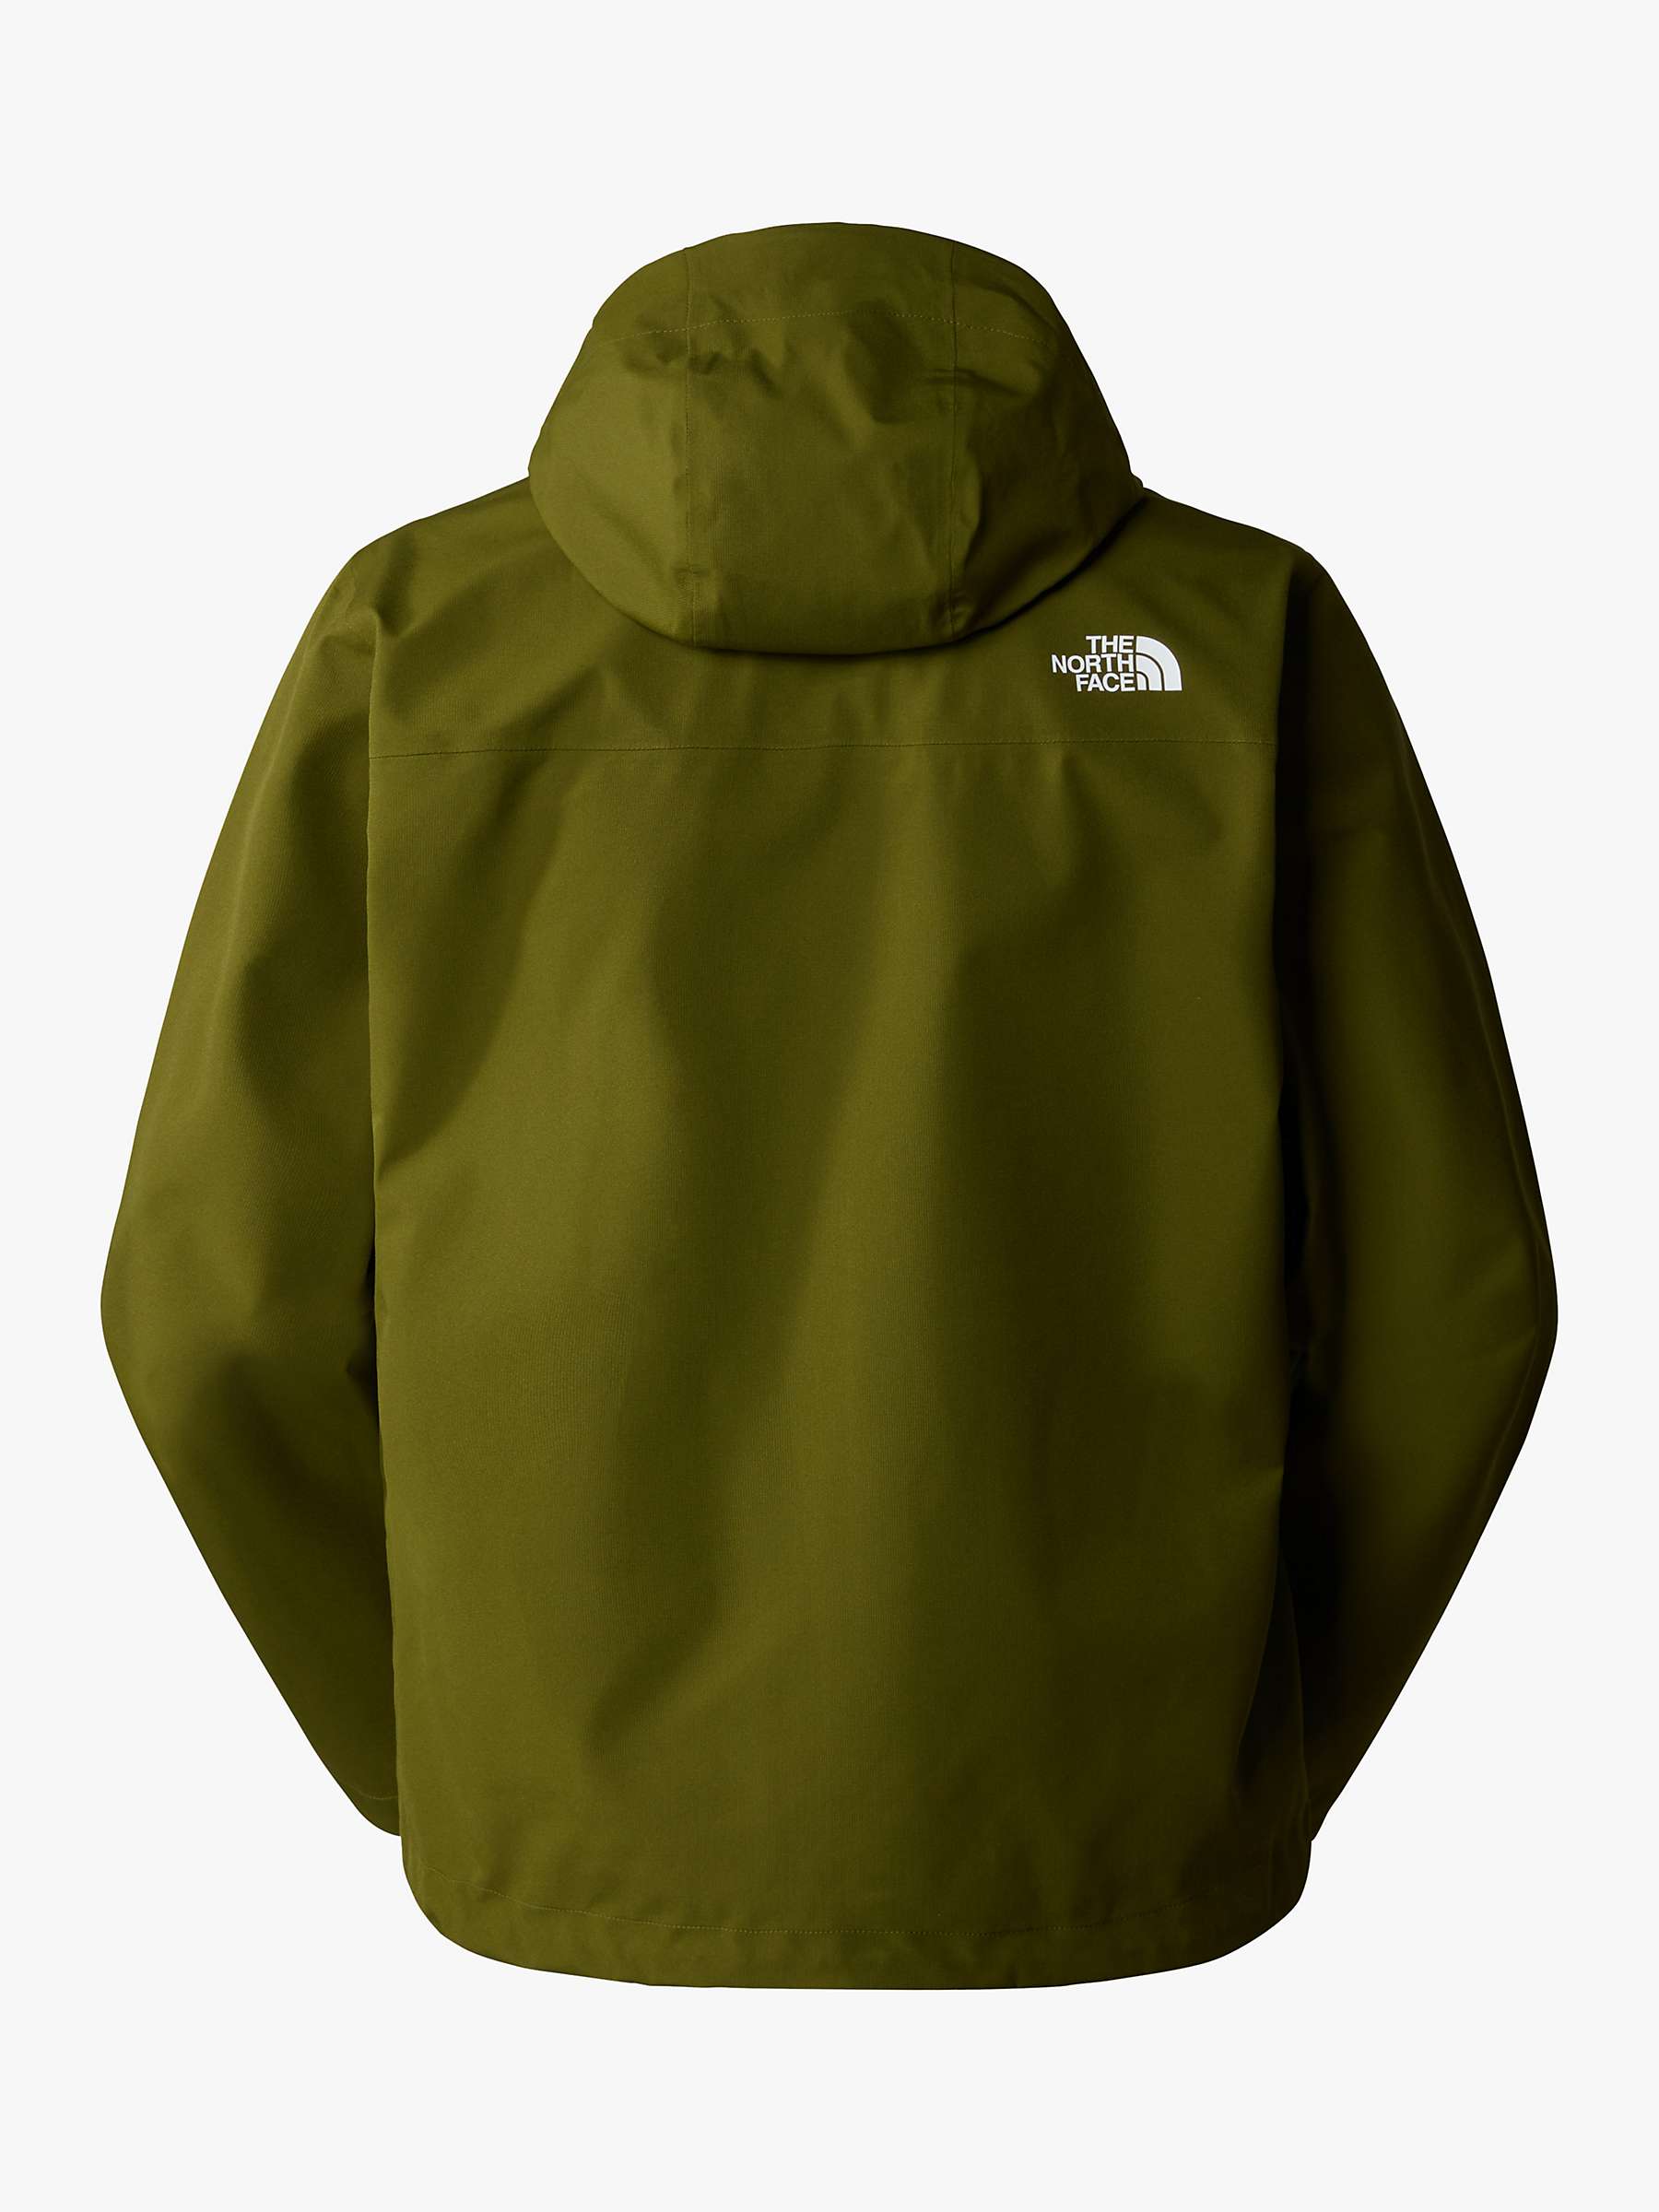 Buy The North Face Whiton Waterproof Jacket, Forest Olive Online at johnlewis.com